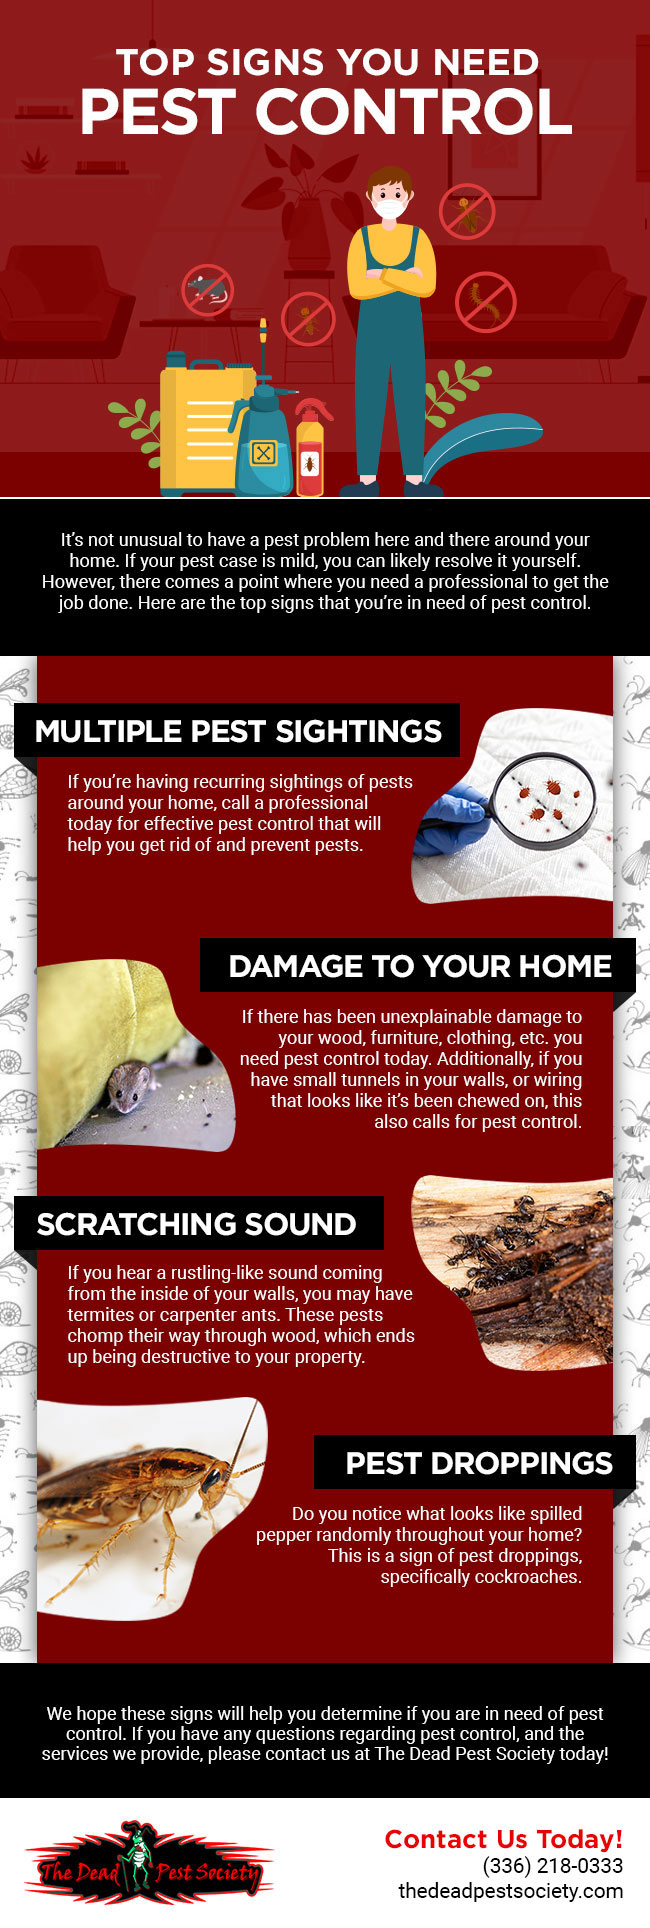 Top Signs You Need Pest Control